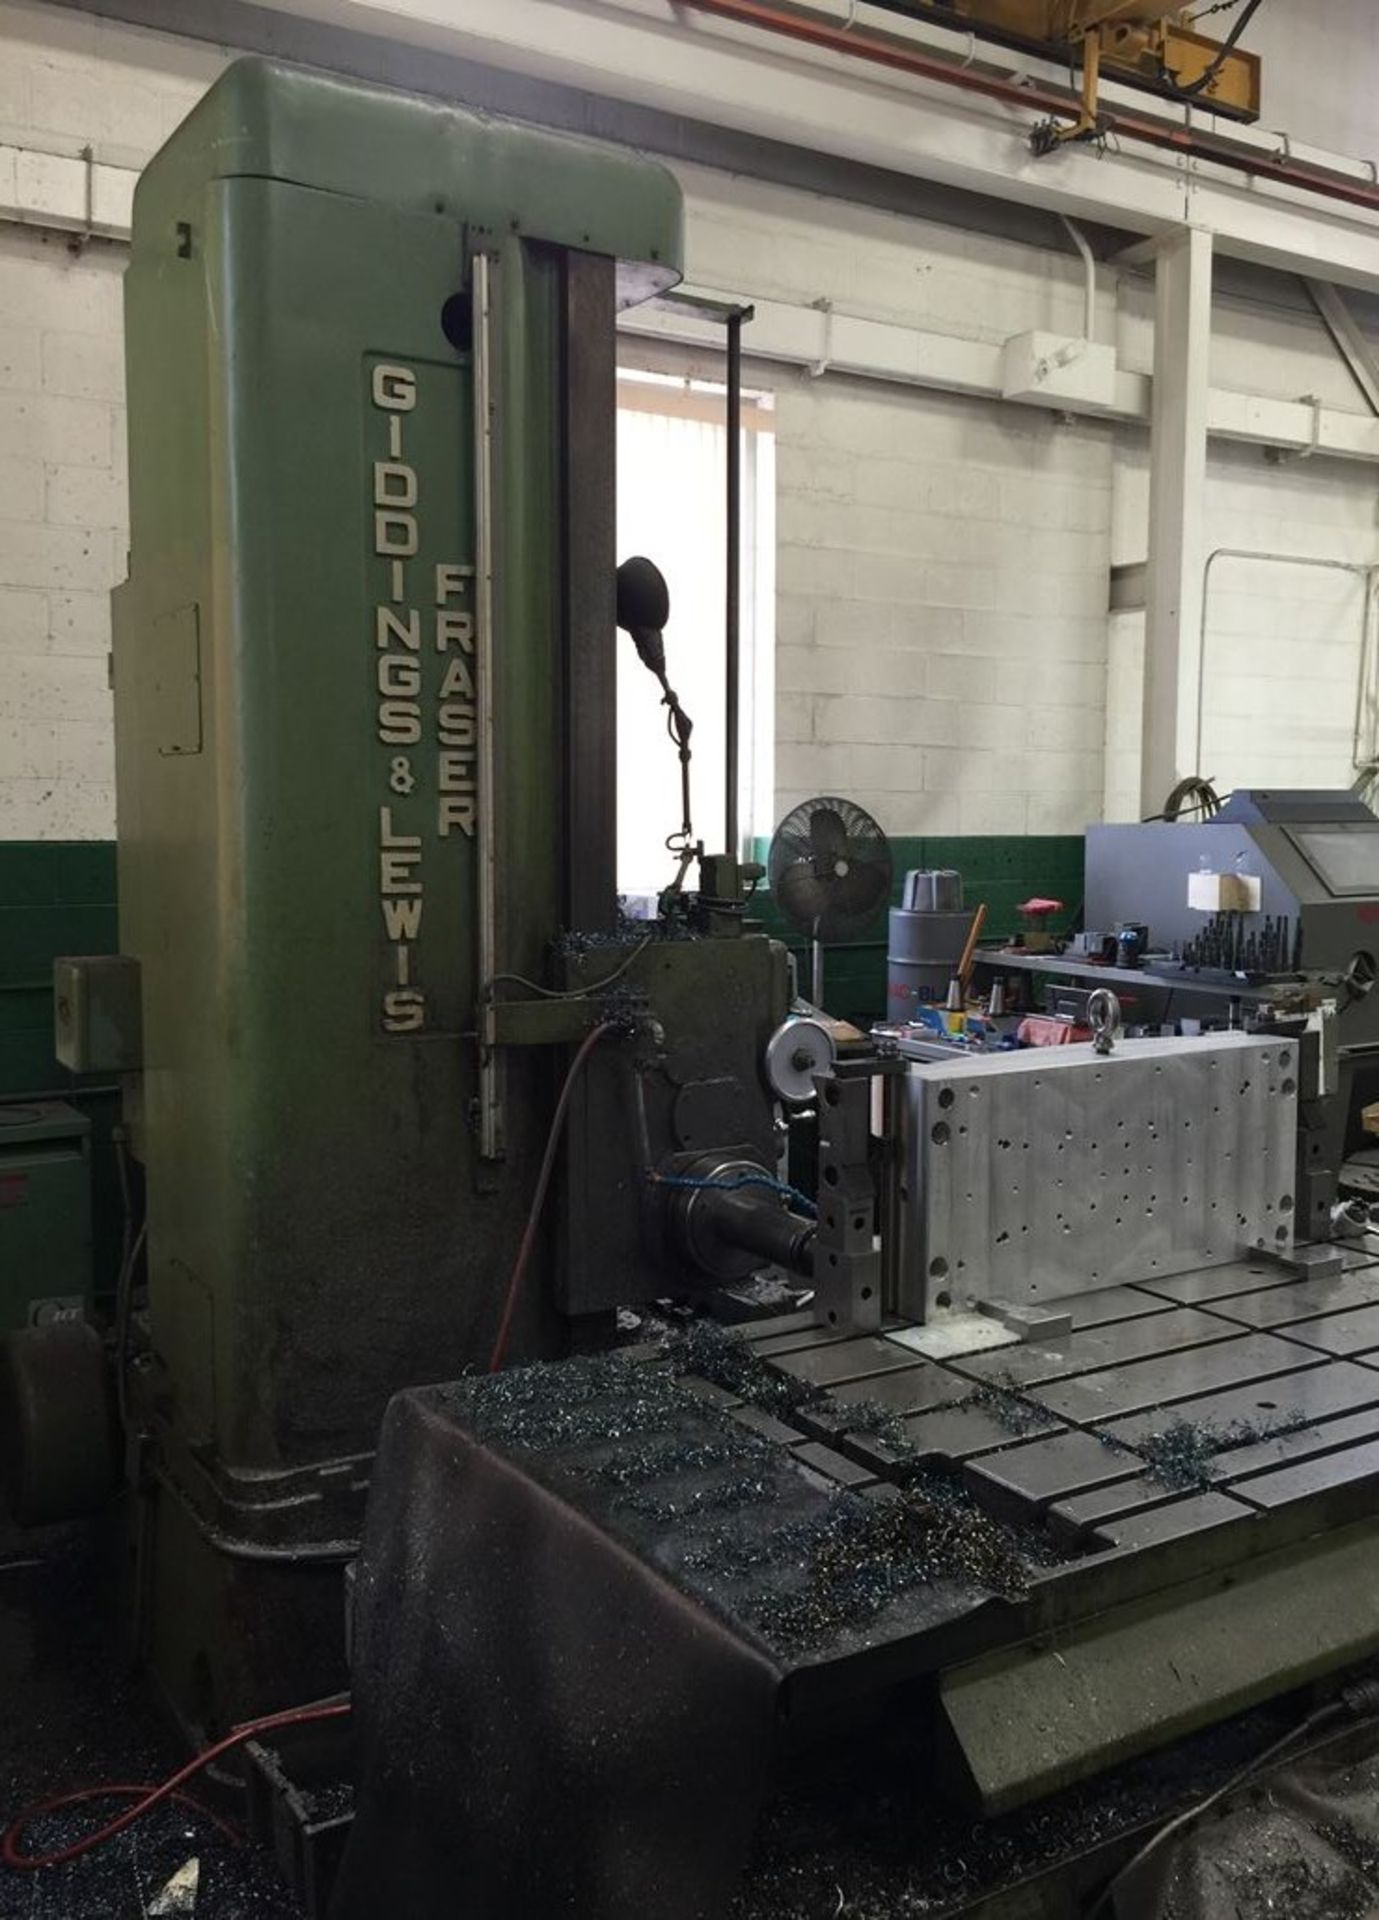 G & L HORIZONTAL BORING MILL TYPE T4 WITH DRO, SN 150-688-63, LOCATION MI - Image 3 of 9